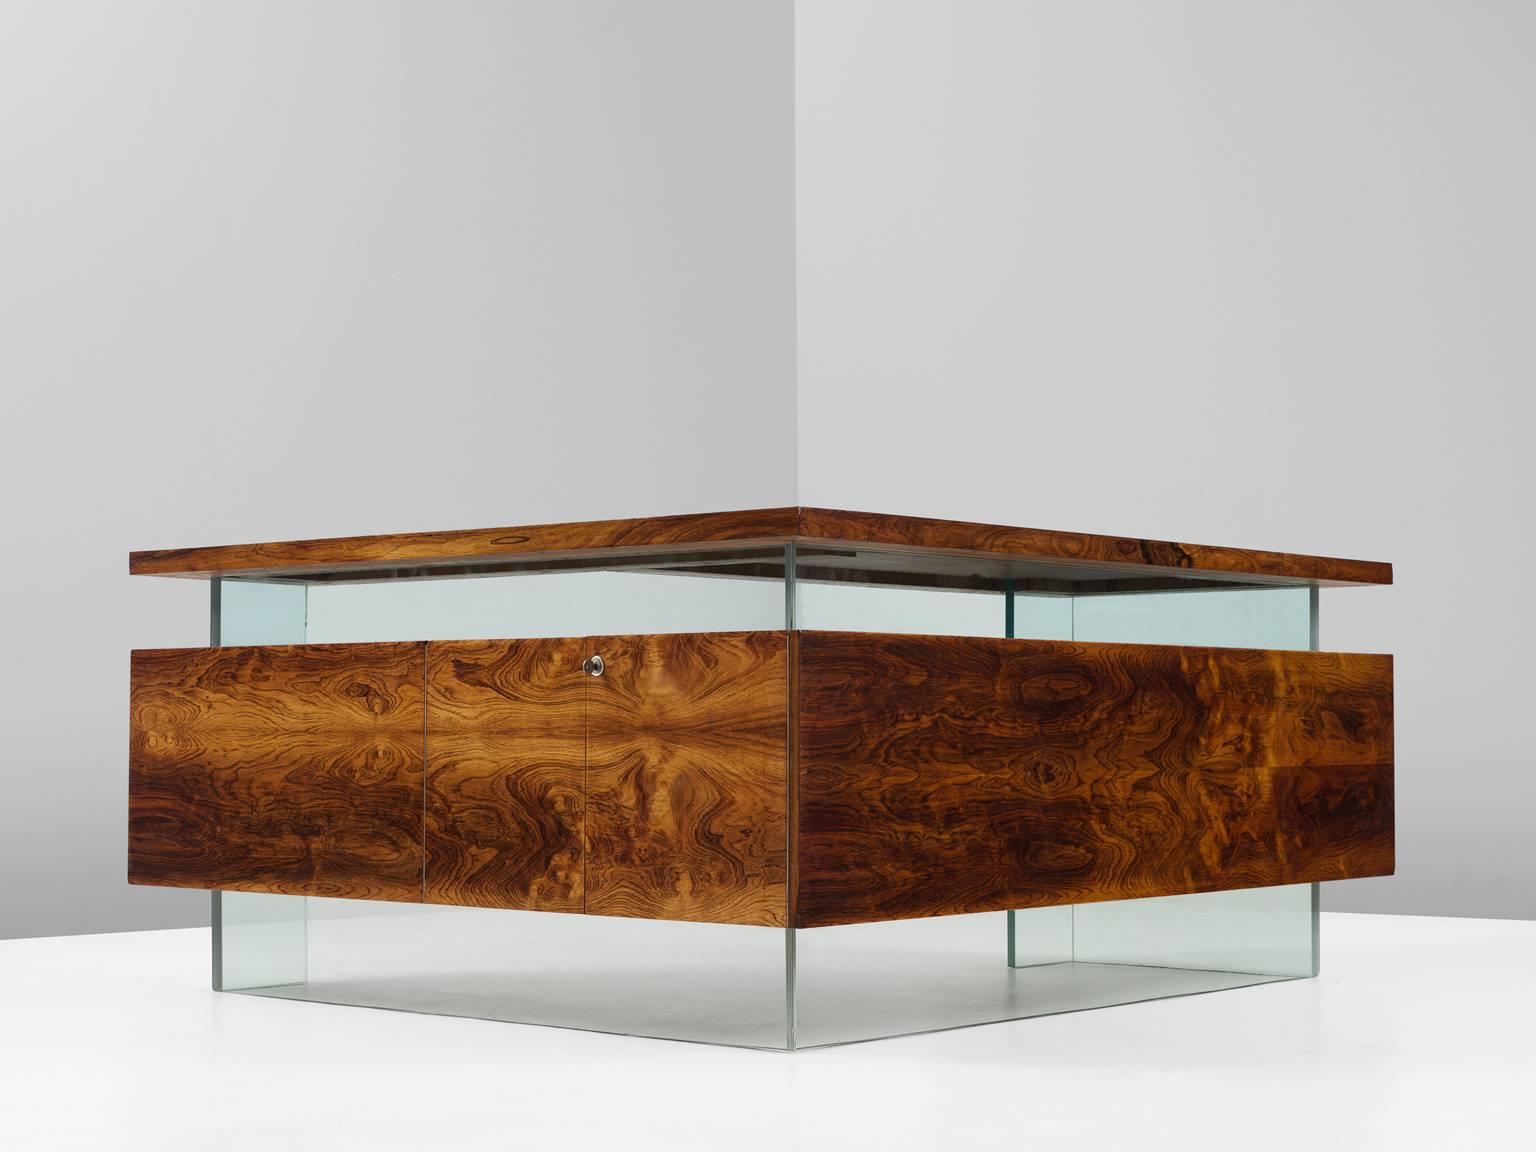 Desk, in rosewood and glass, France, 1960s. 

Large desk and return in Rio rosewood and glass. This desk originates from France. The wonderful design shows resemblance to the works of French designers like Rene Jean Caillette, Pierre Guariche